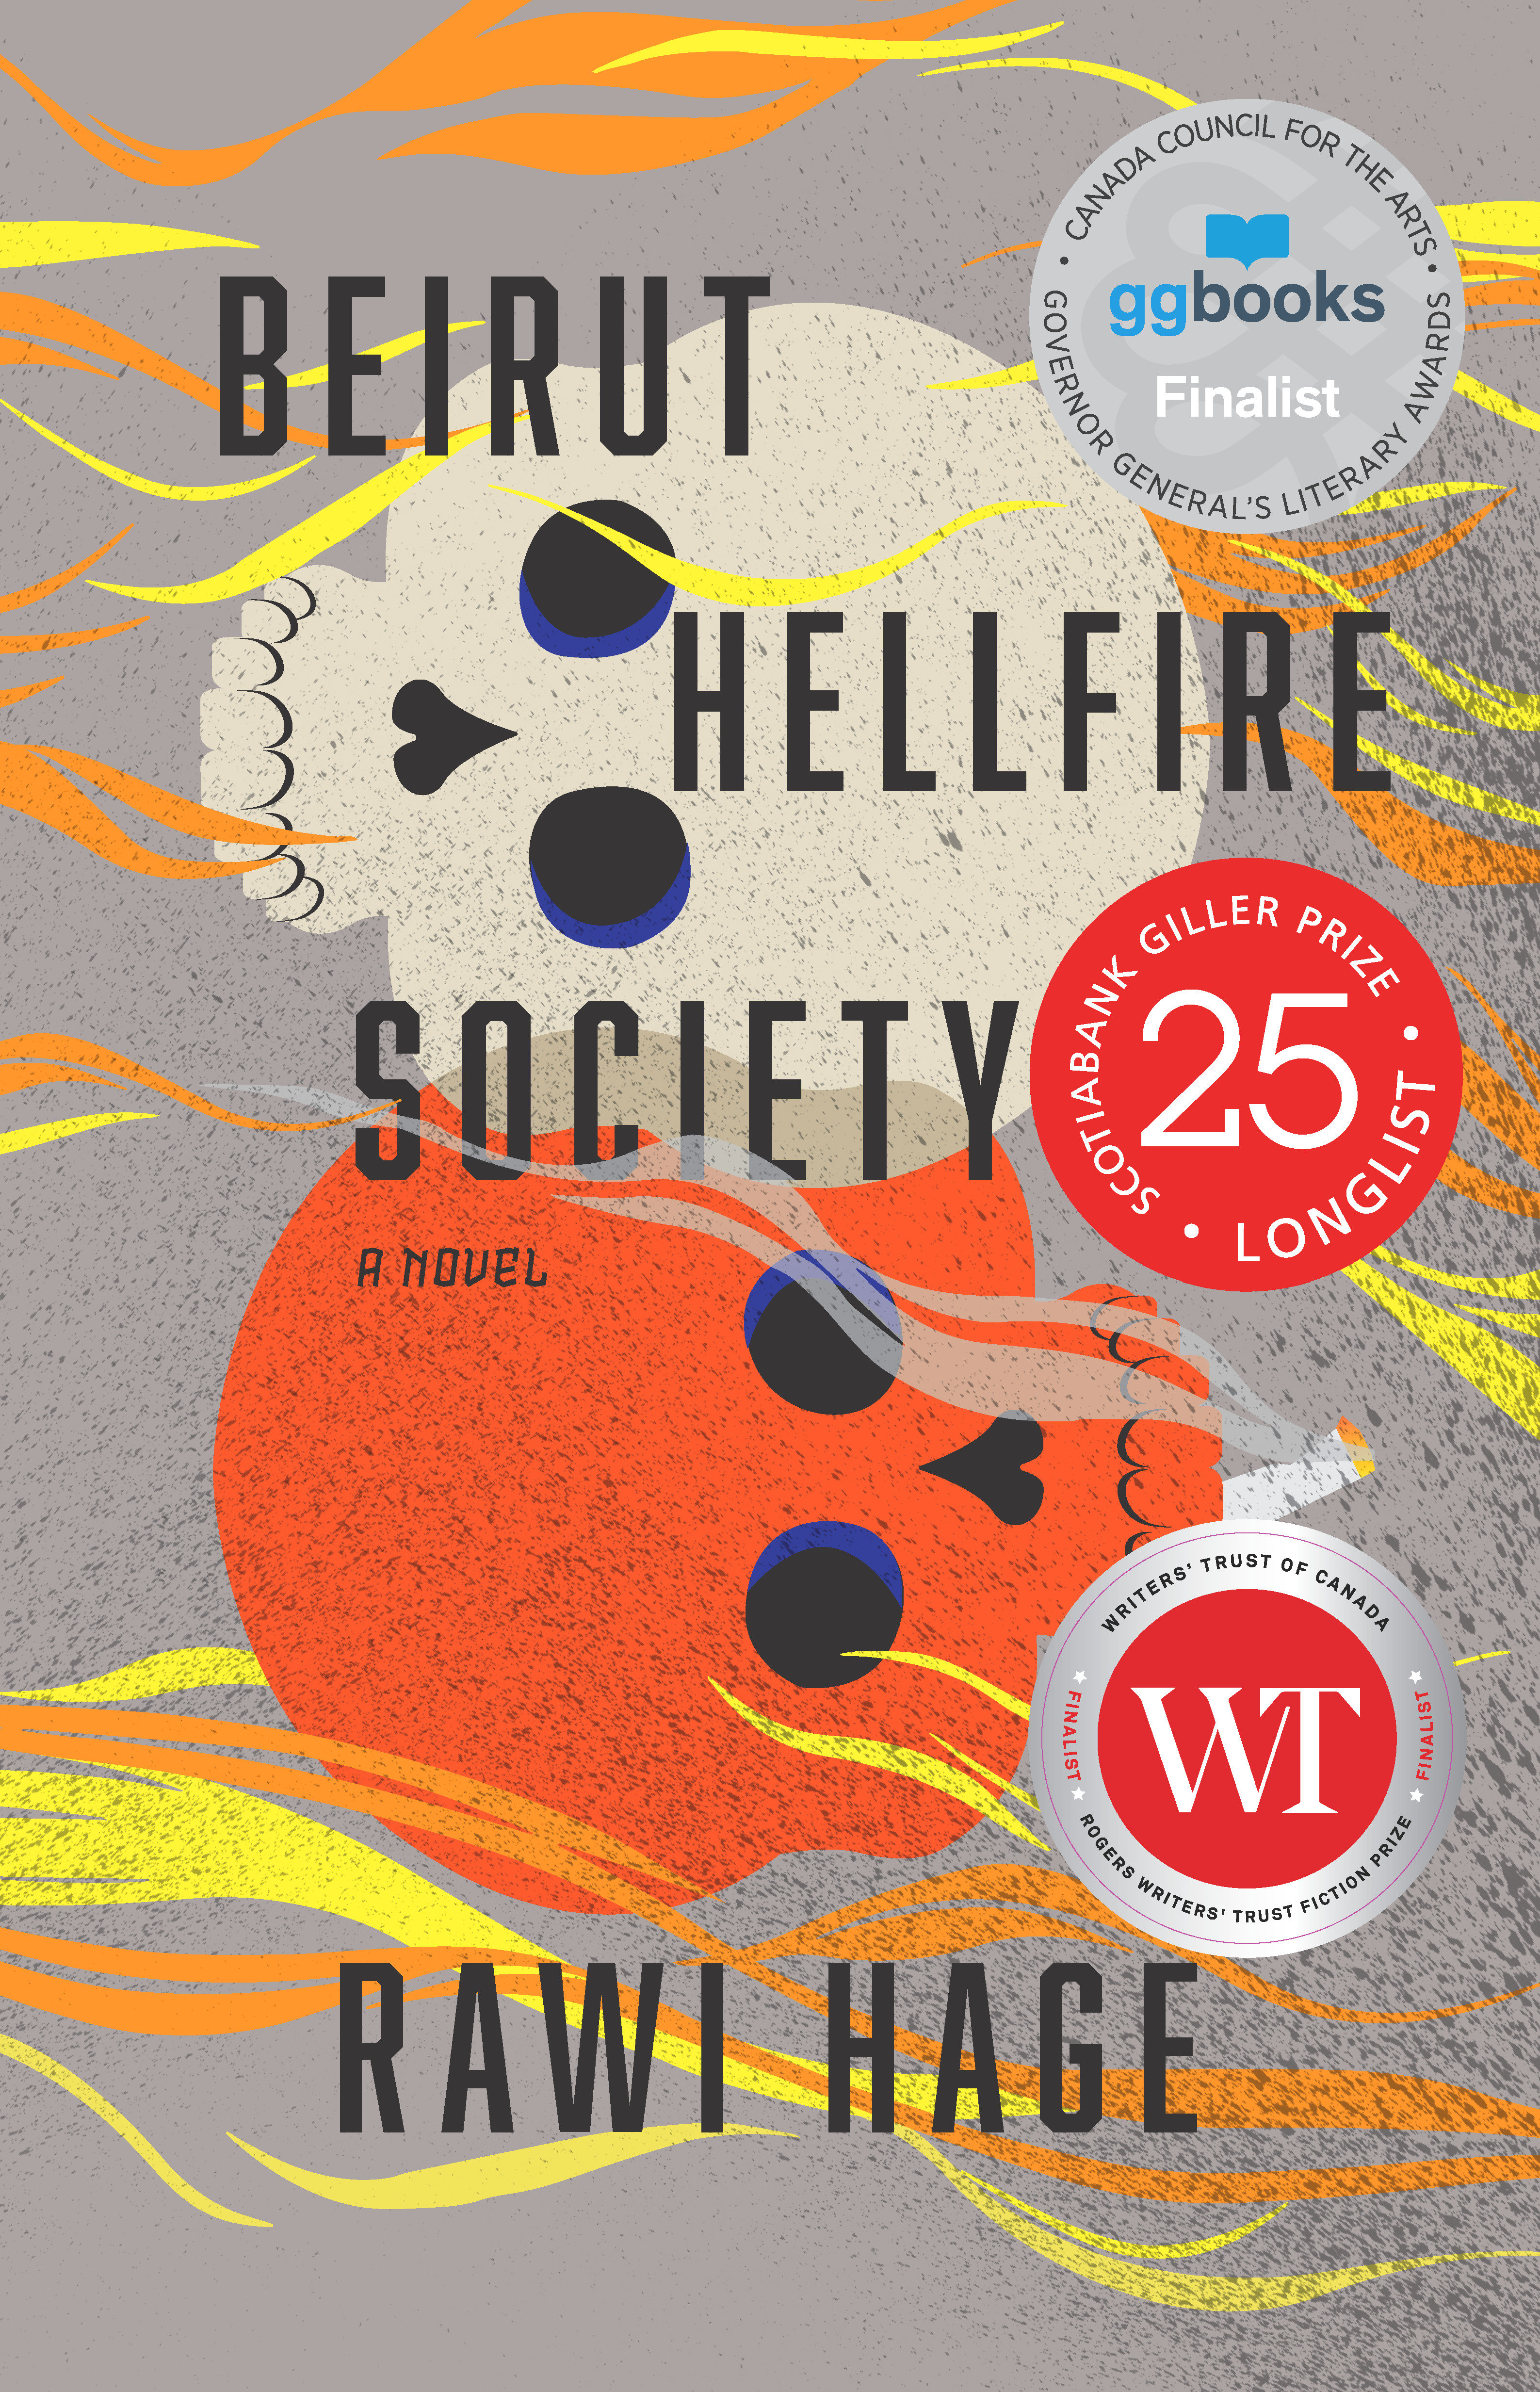 Cover Image of Beirut Hellfire Society